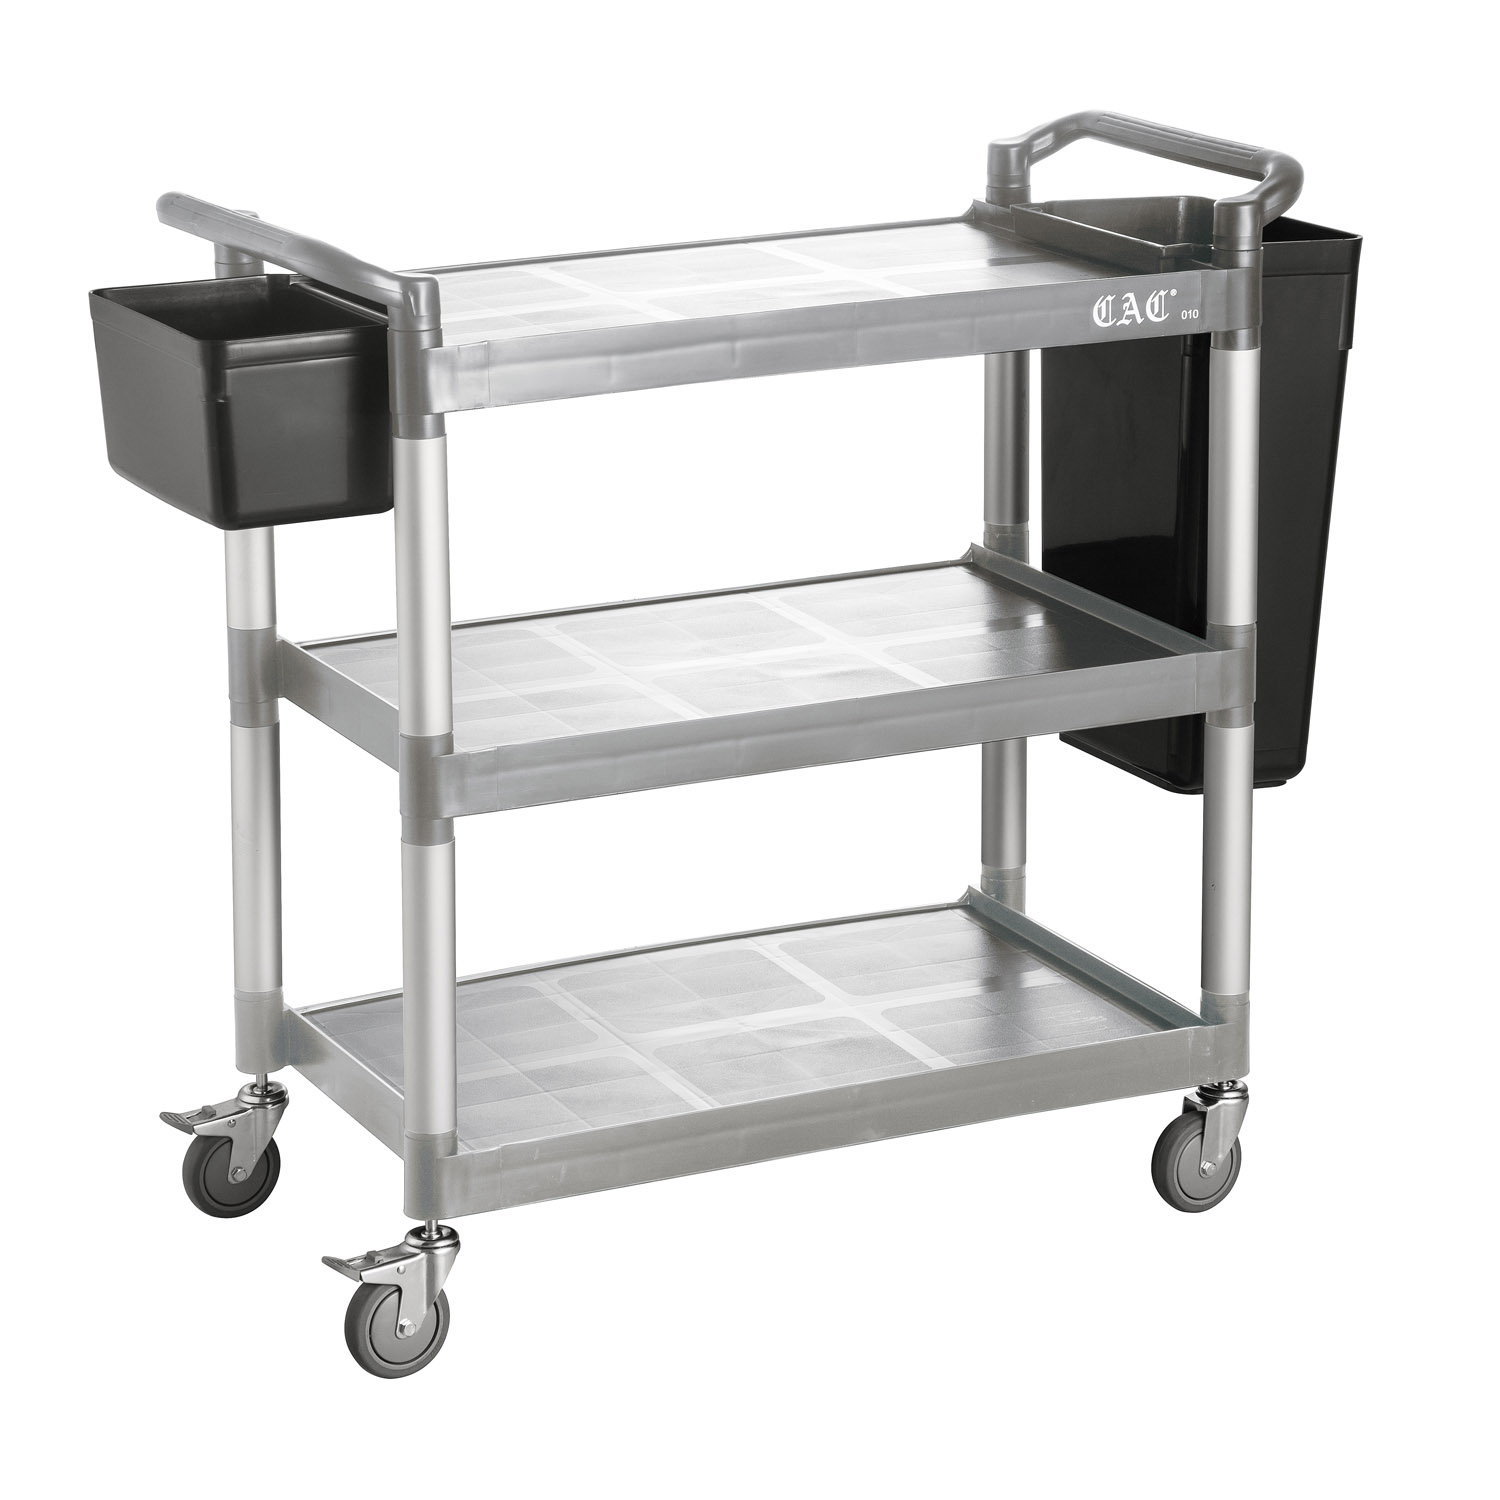 CAC China BTUC-19GY 3-Tier Gray Utility Cart 40-1/8" x 19-3/4" x 37-3/4"H